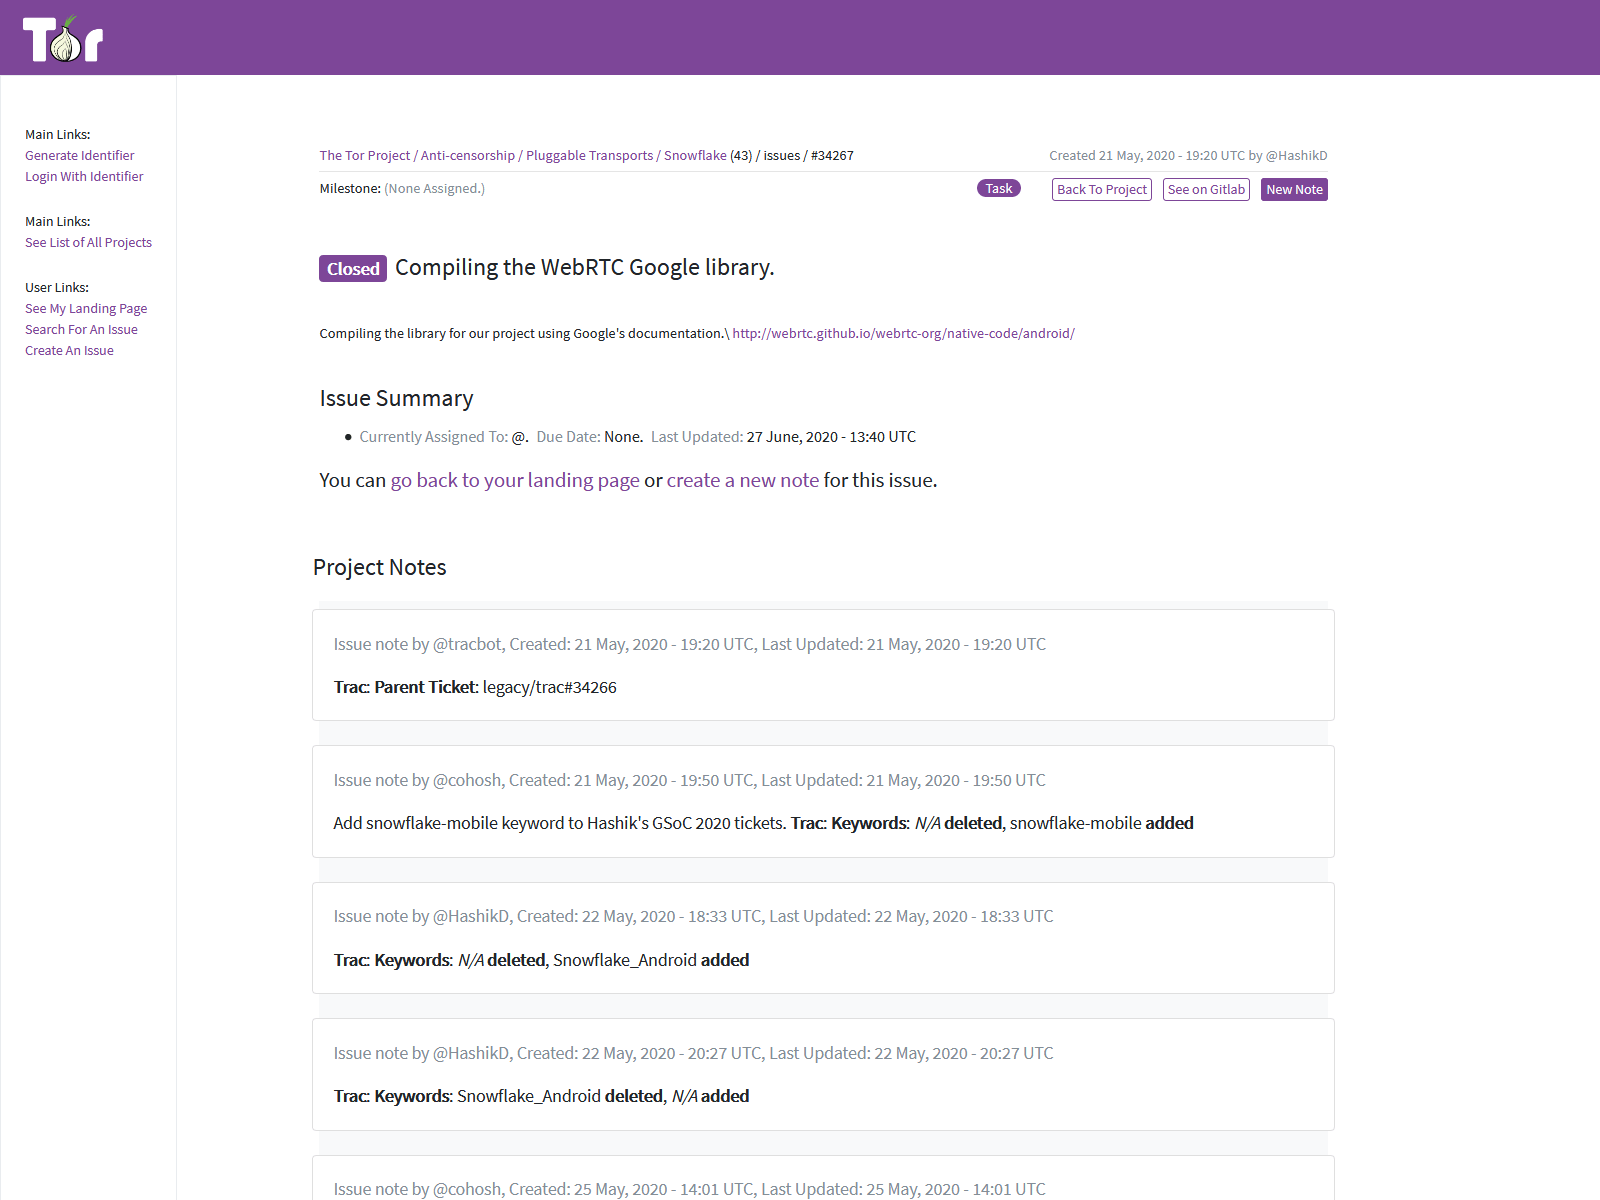 An example of a closed issue view. The top shows details about the issue from gitlab, including the namespace, issue number, assignee, milestones, labels, etc. This is followed by a detail summary and a list of project notes.